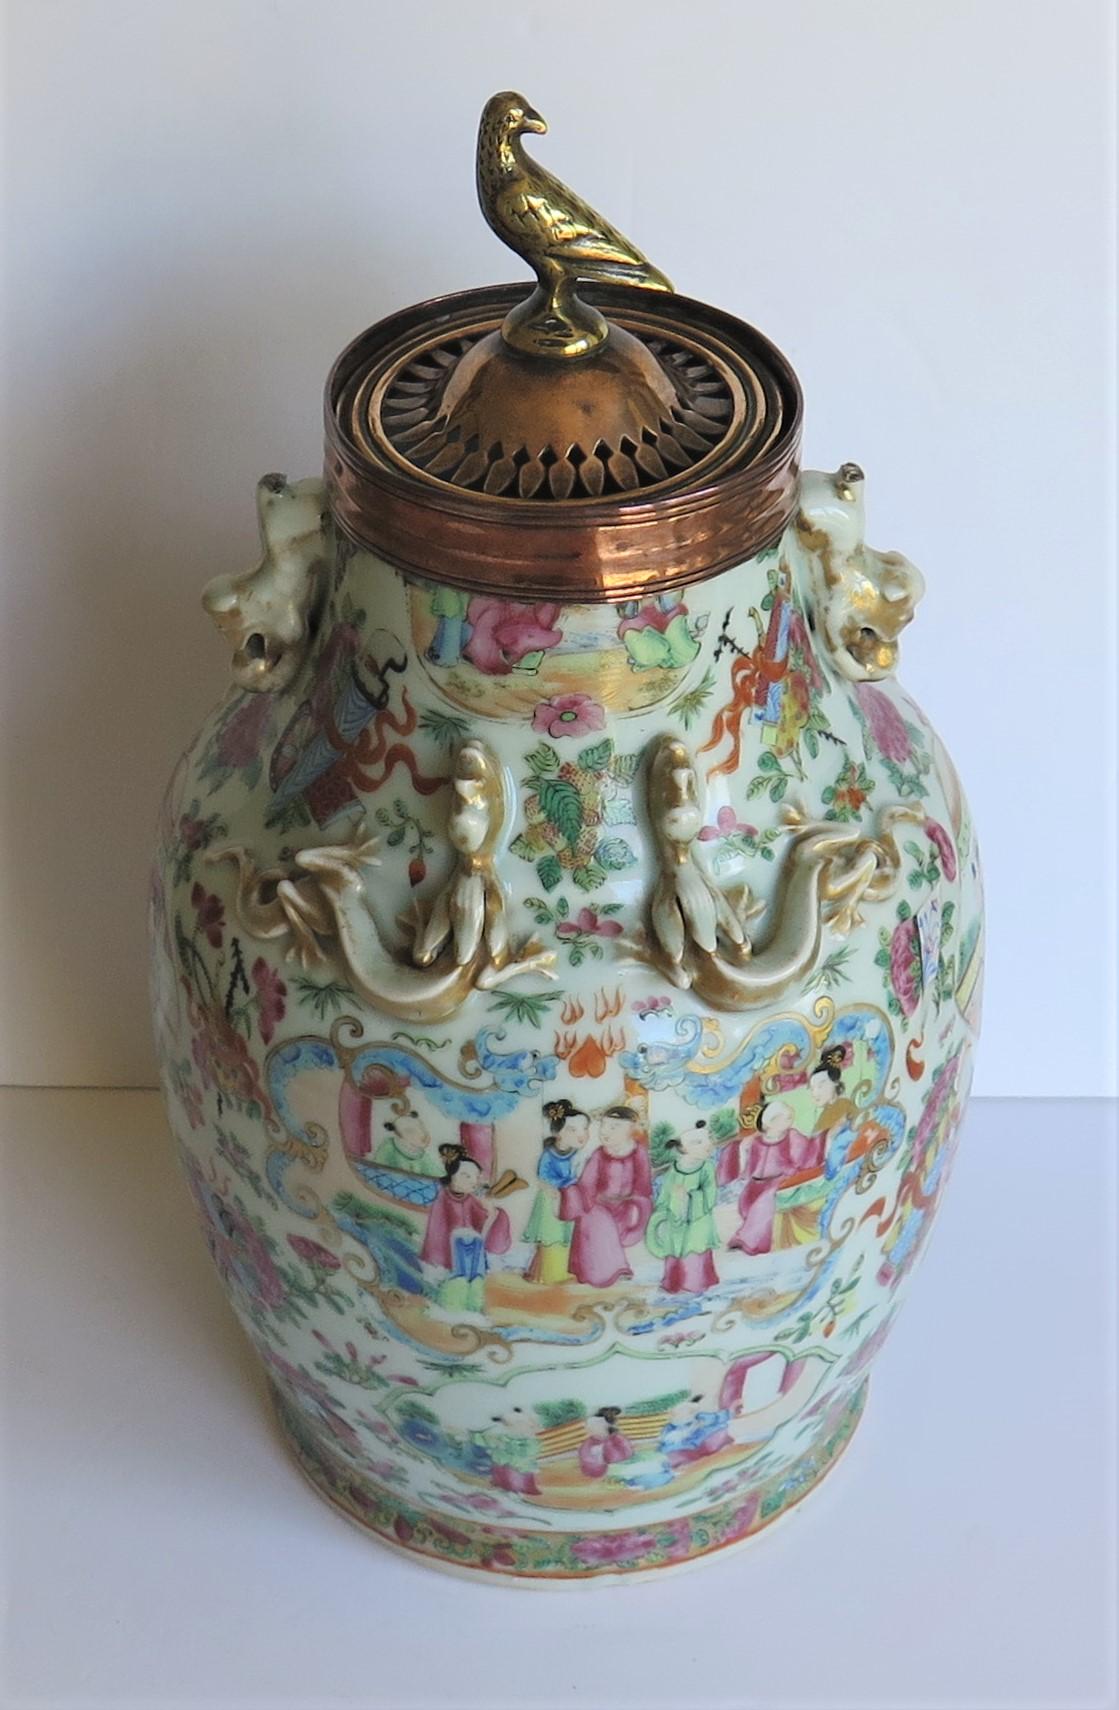 This is a very decorative Chinese export, (Canton) porcelain, hand painted, Rose Mandarin vase which has been reduced in height to make a Potpourri vase or urn having a copper and brass ring top with a bird, which we date to the early 19th century,